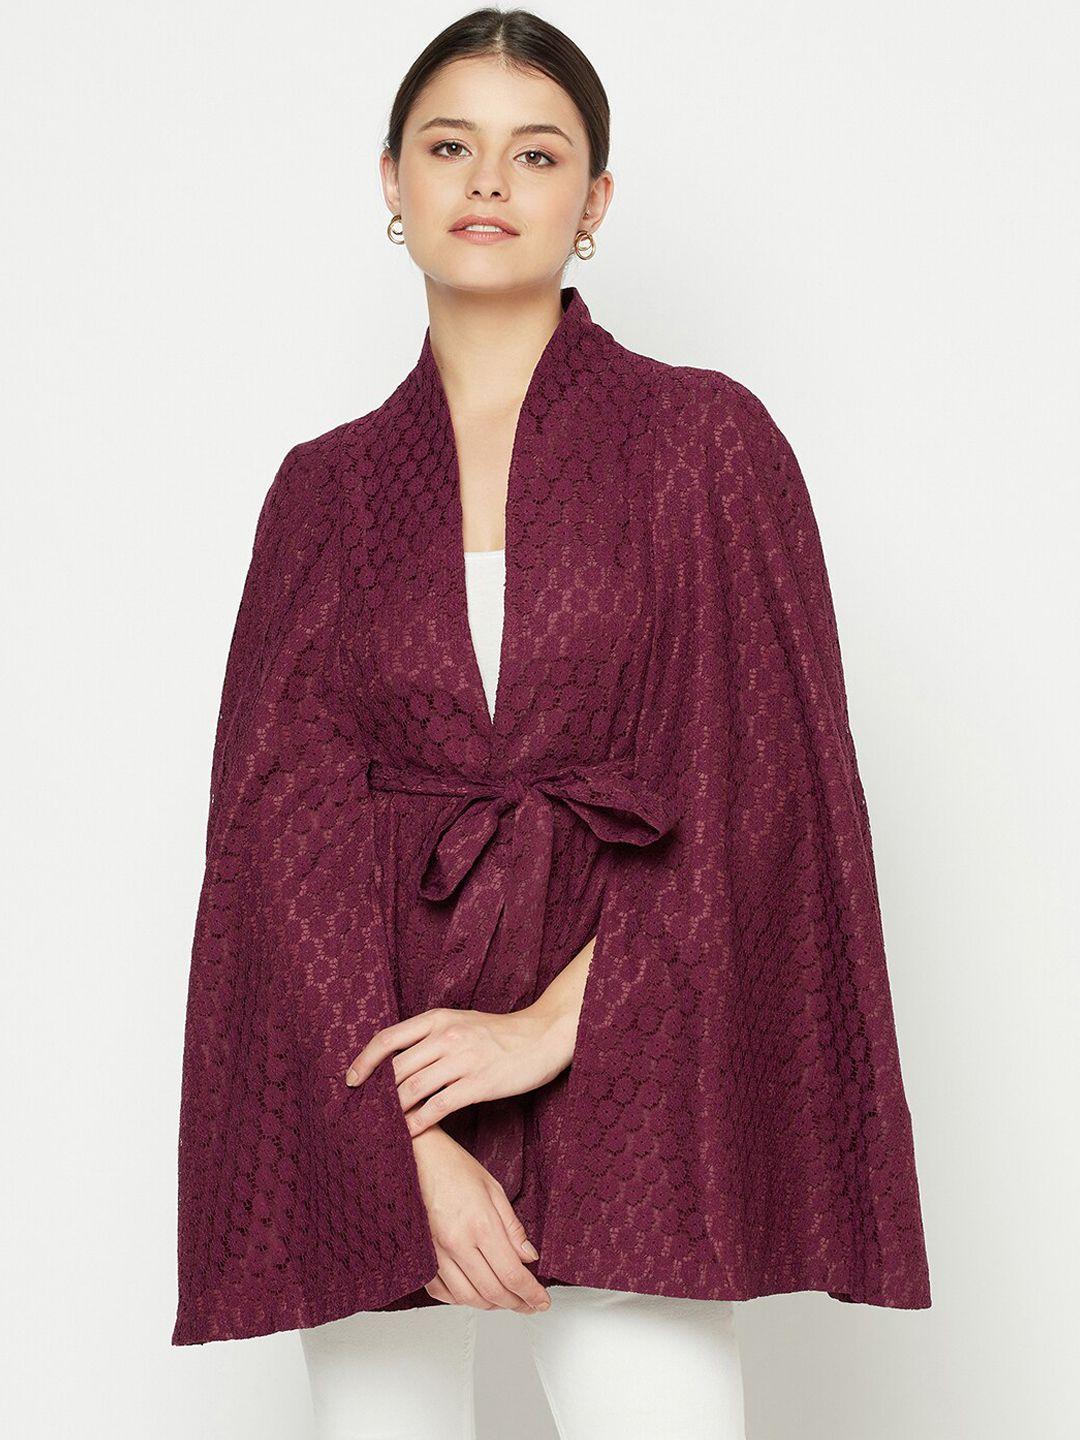 owncraft women maroon floral lace cape jacket